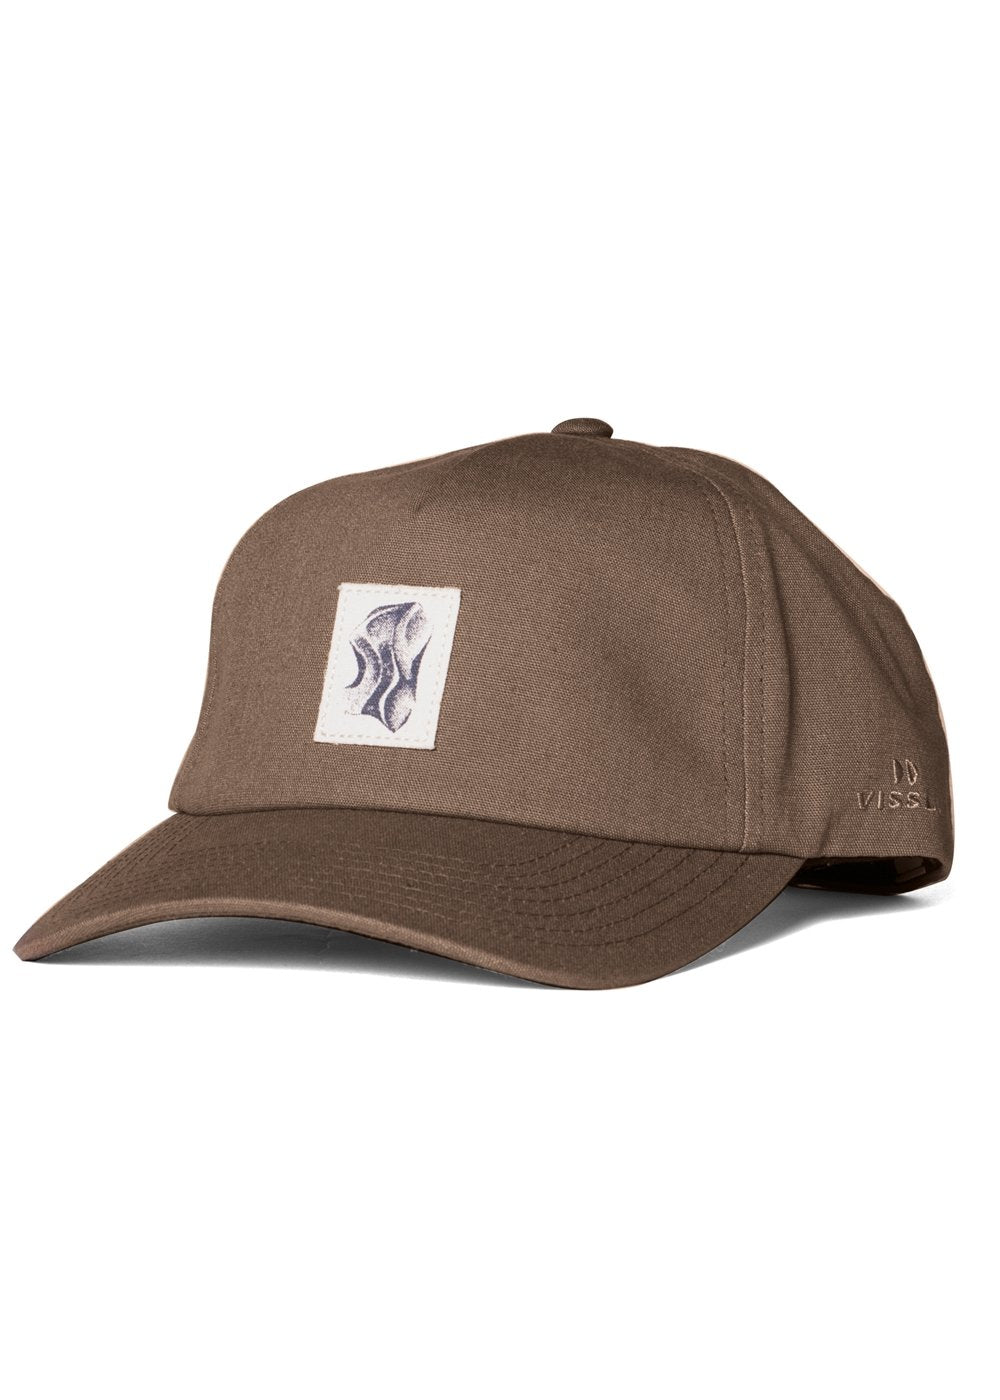 Undefined Lines Hat